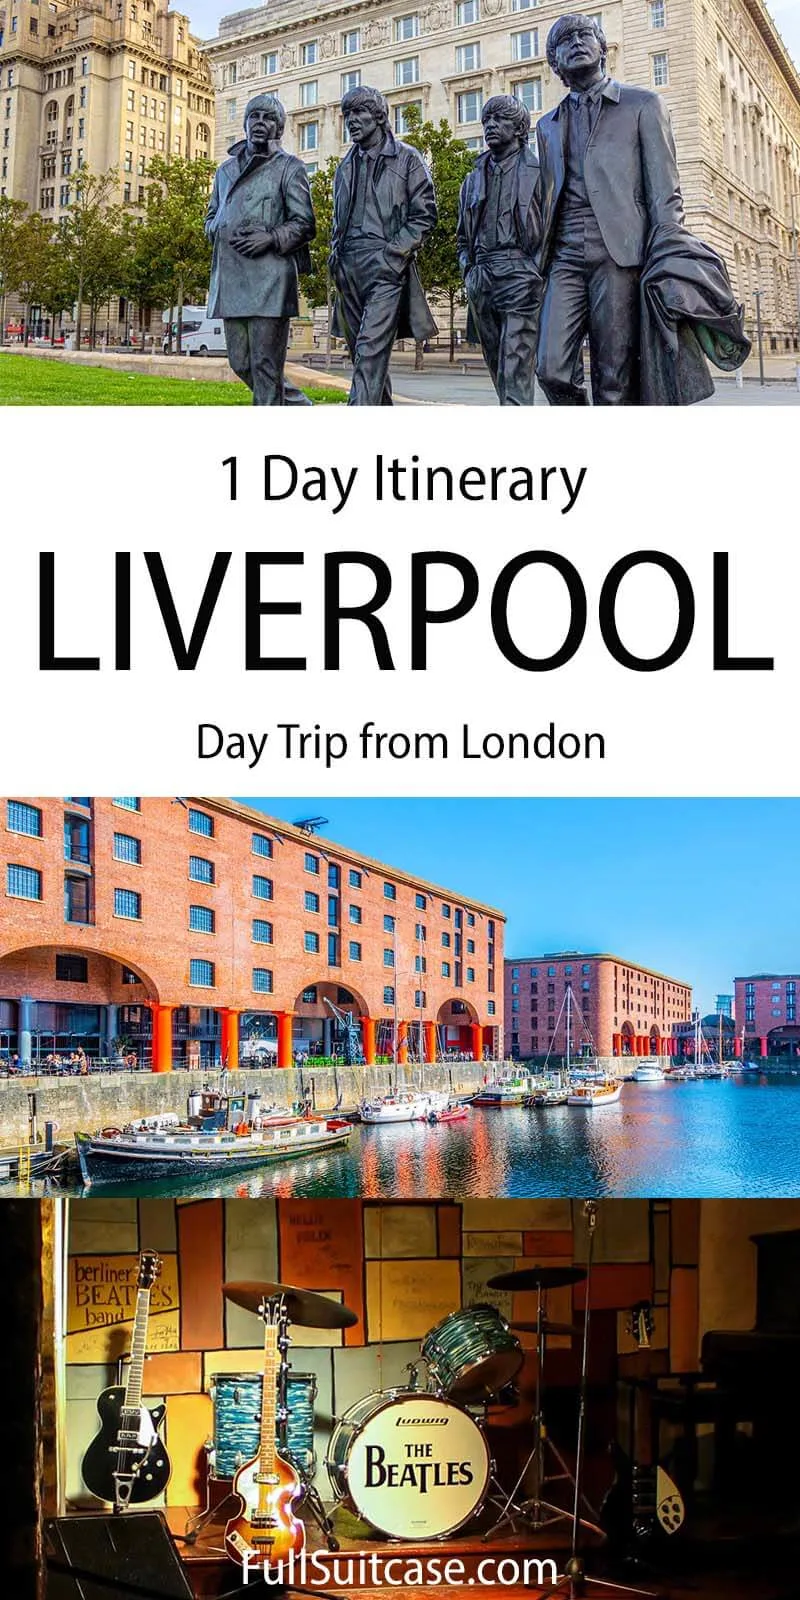 Liverpool day trip itinerary and tips for visiting Liverpool from London